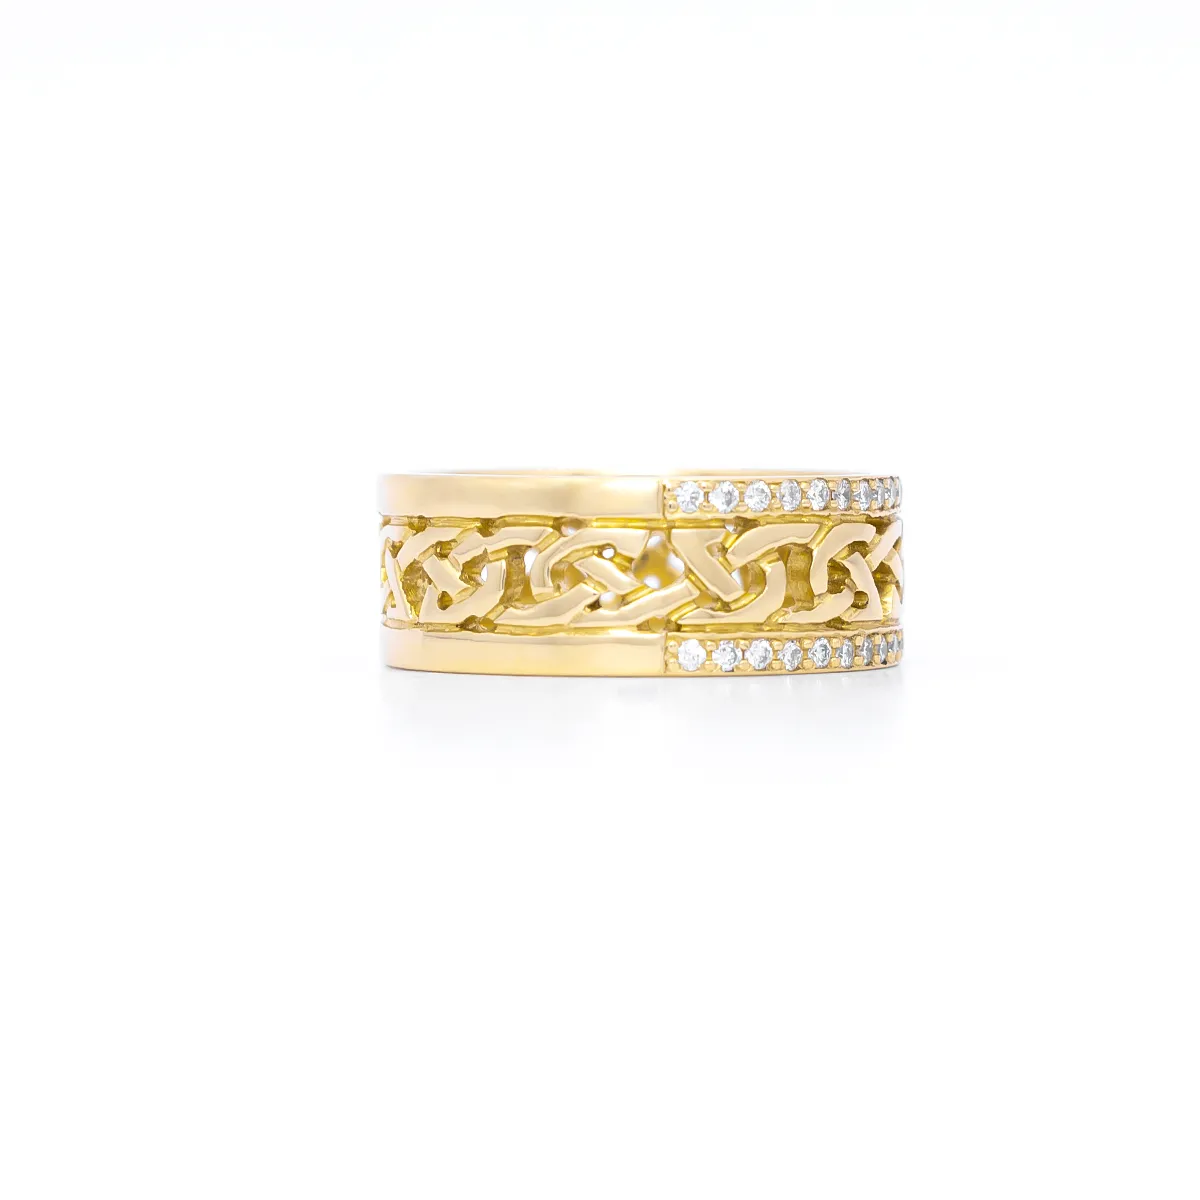 IJCR0034 Yellow Gold Celtic Ring With Diamonds 2